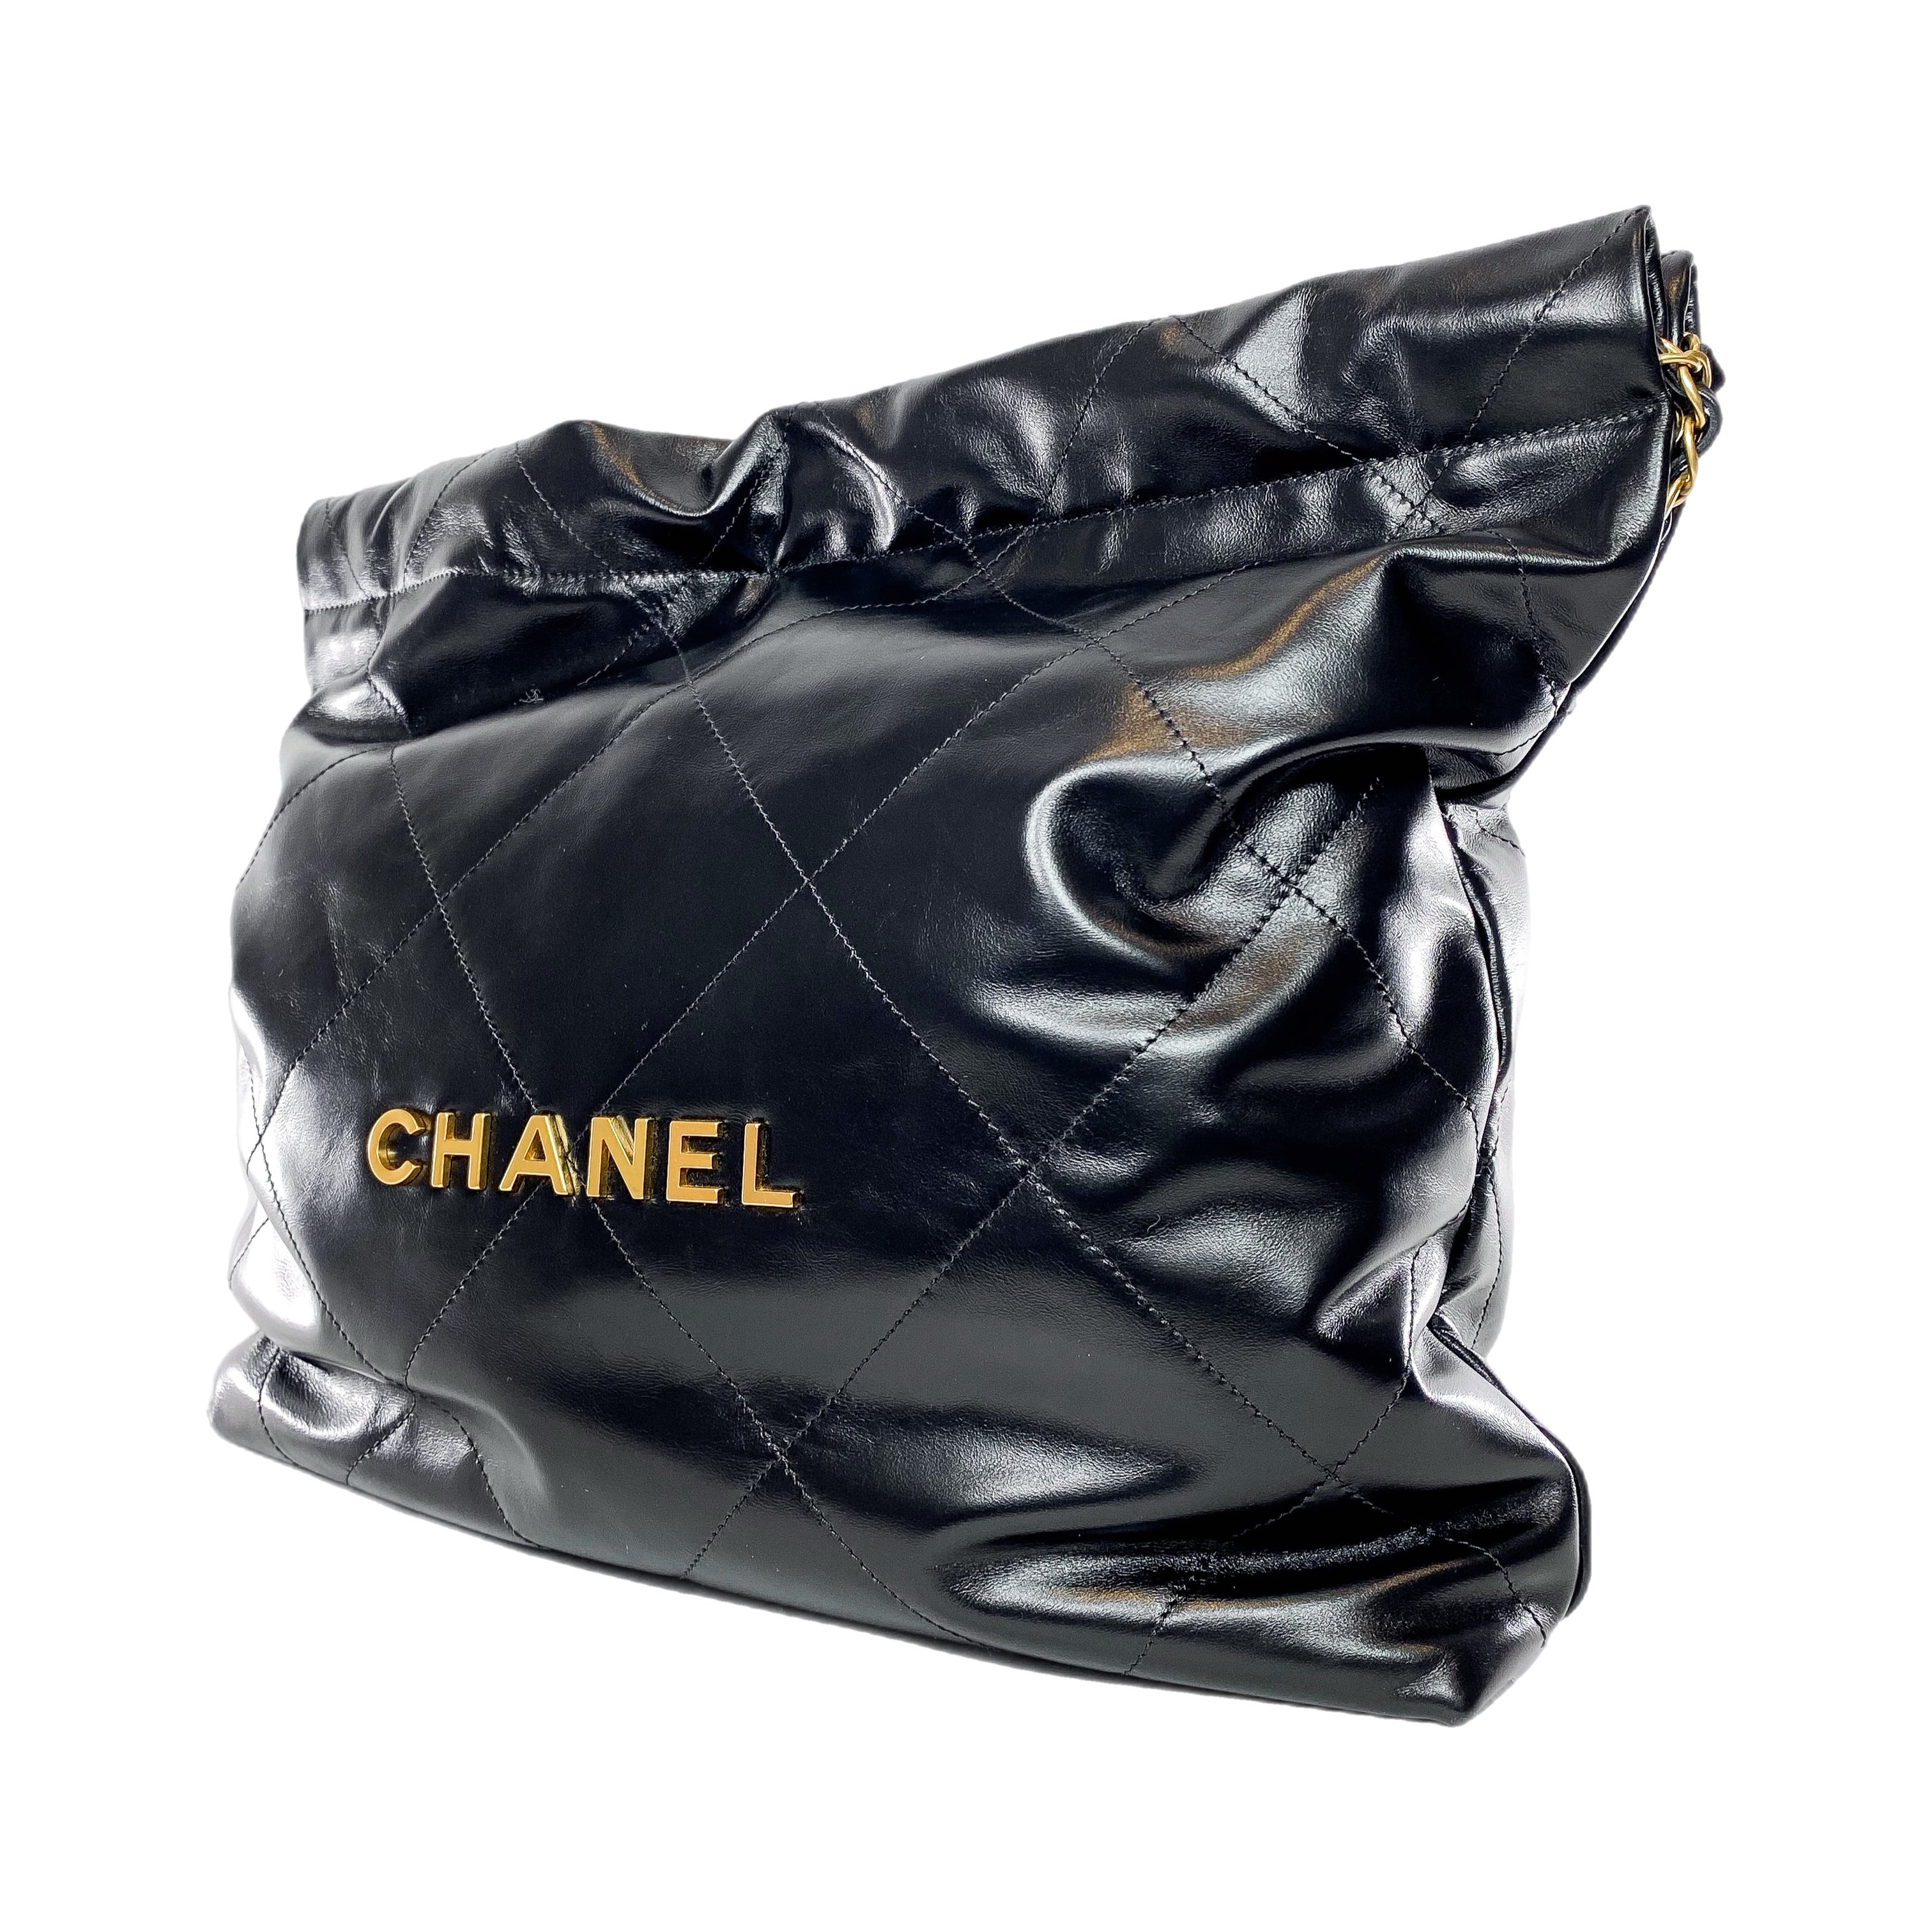 Chanel 22 Medium Black Quilted